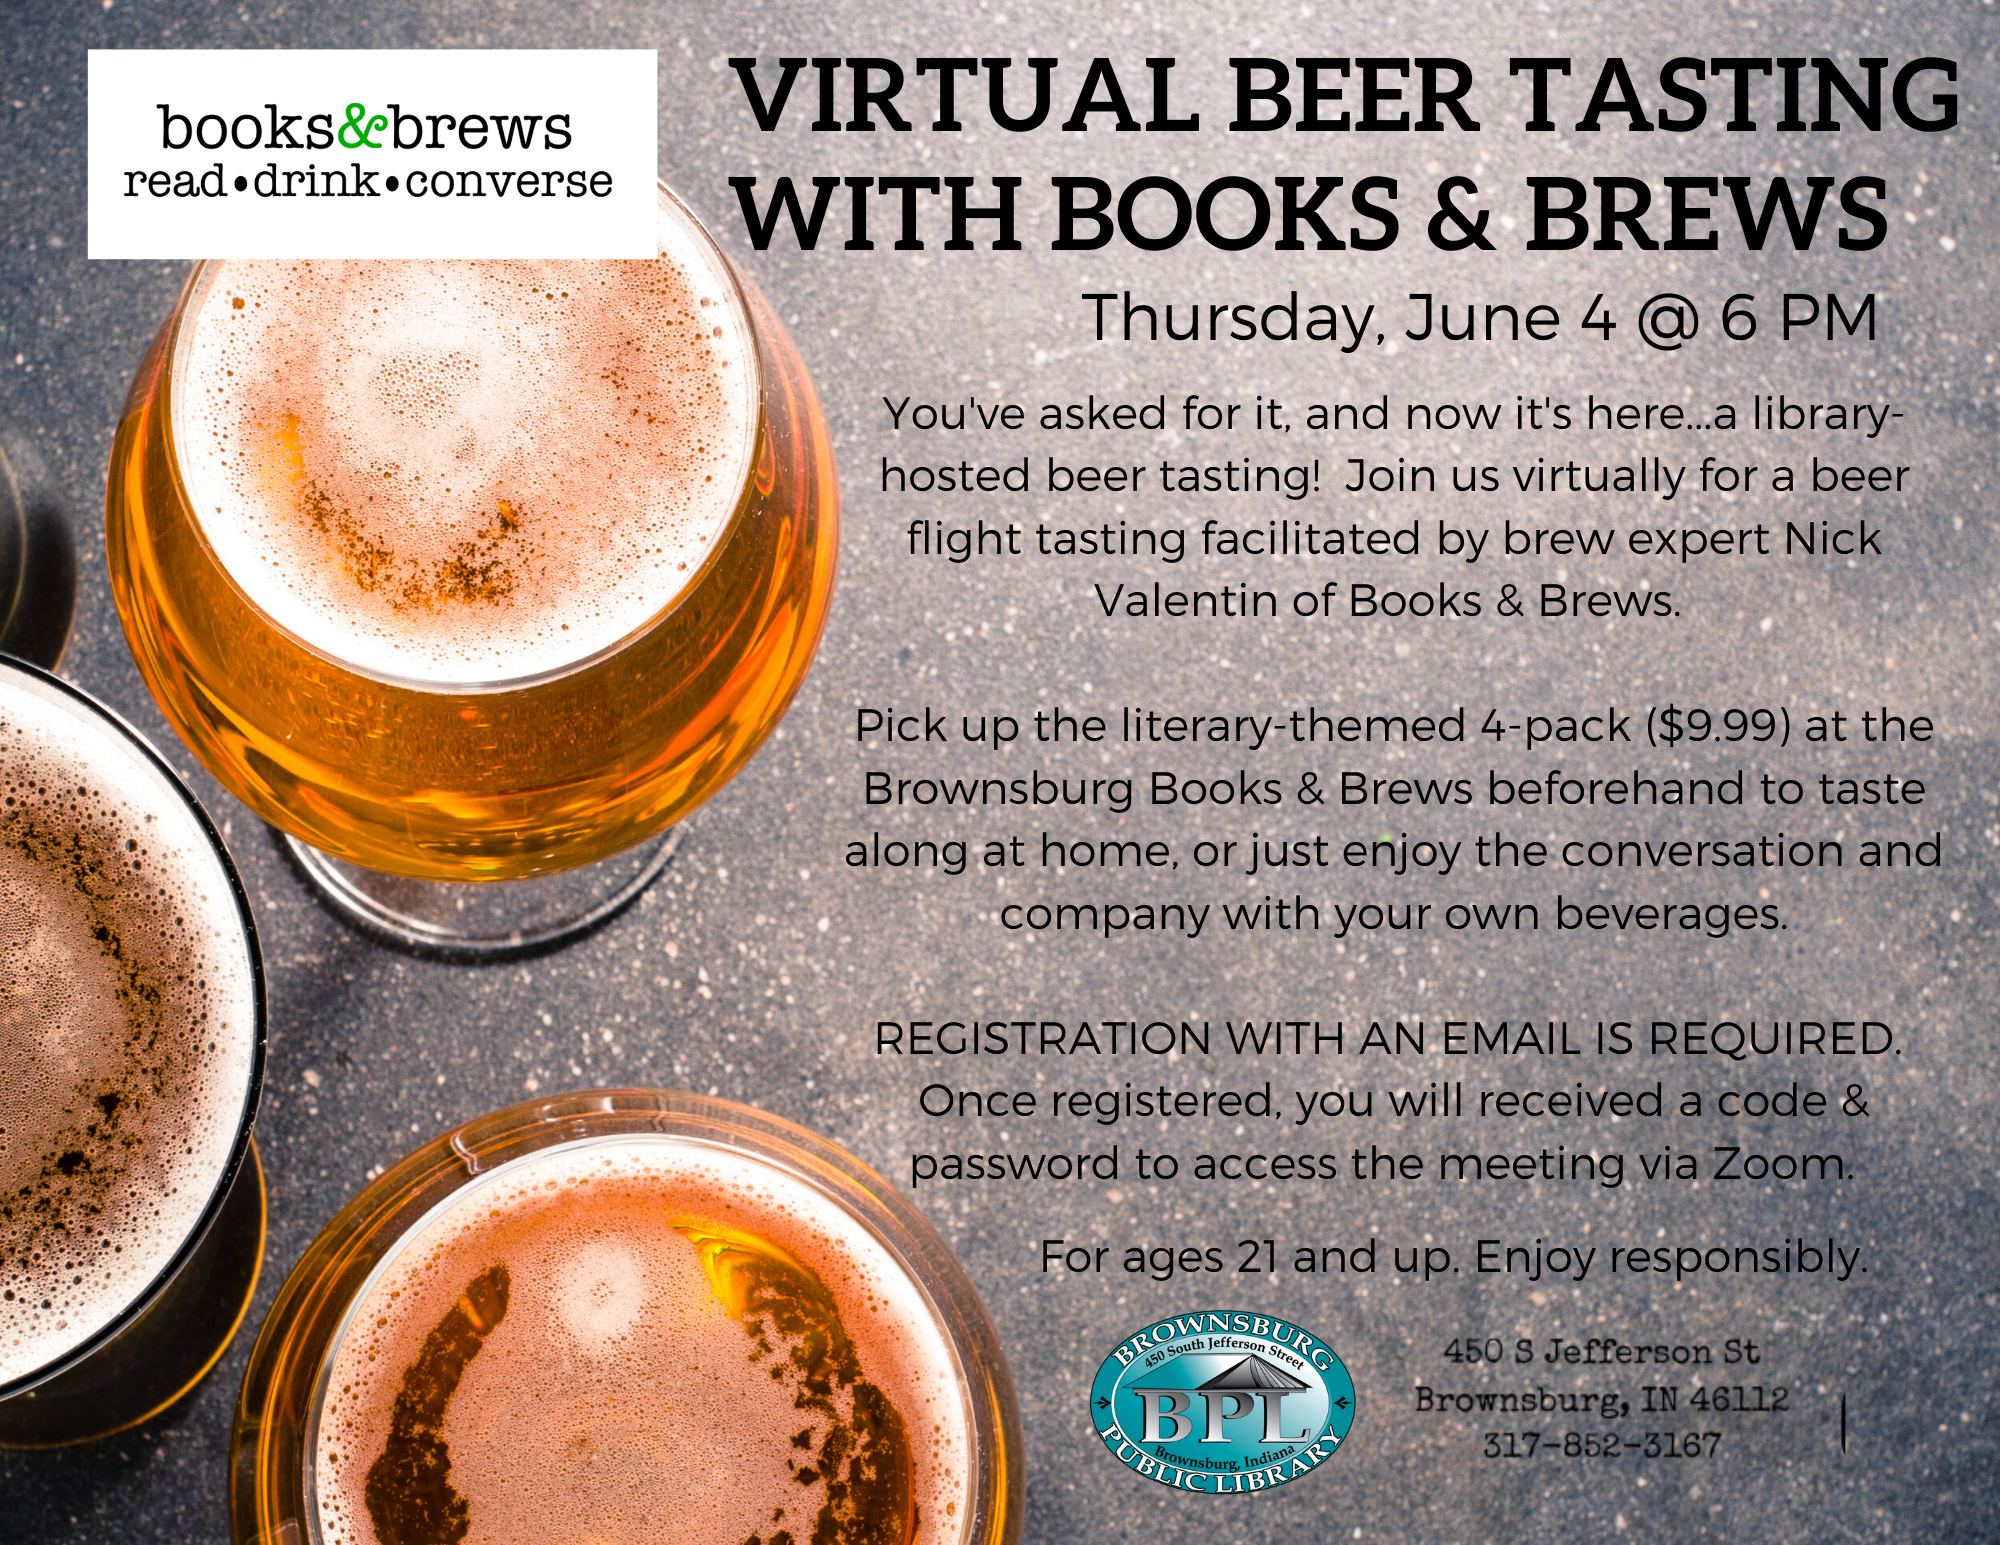 virtual beer tasting with books and brews thursday june 4 6 pm